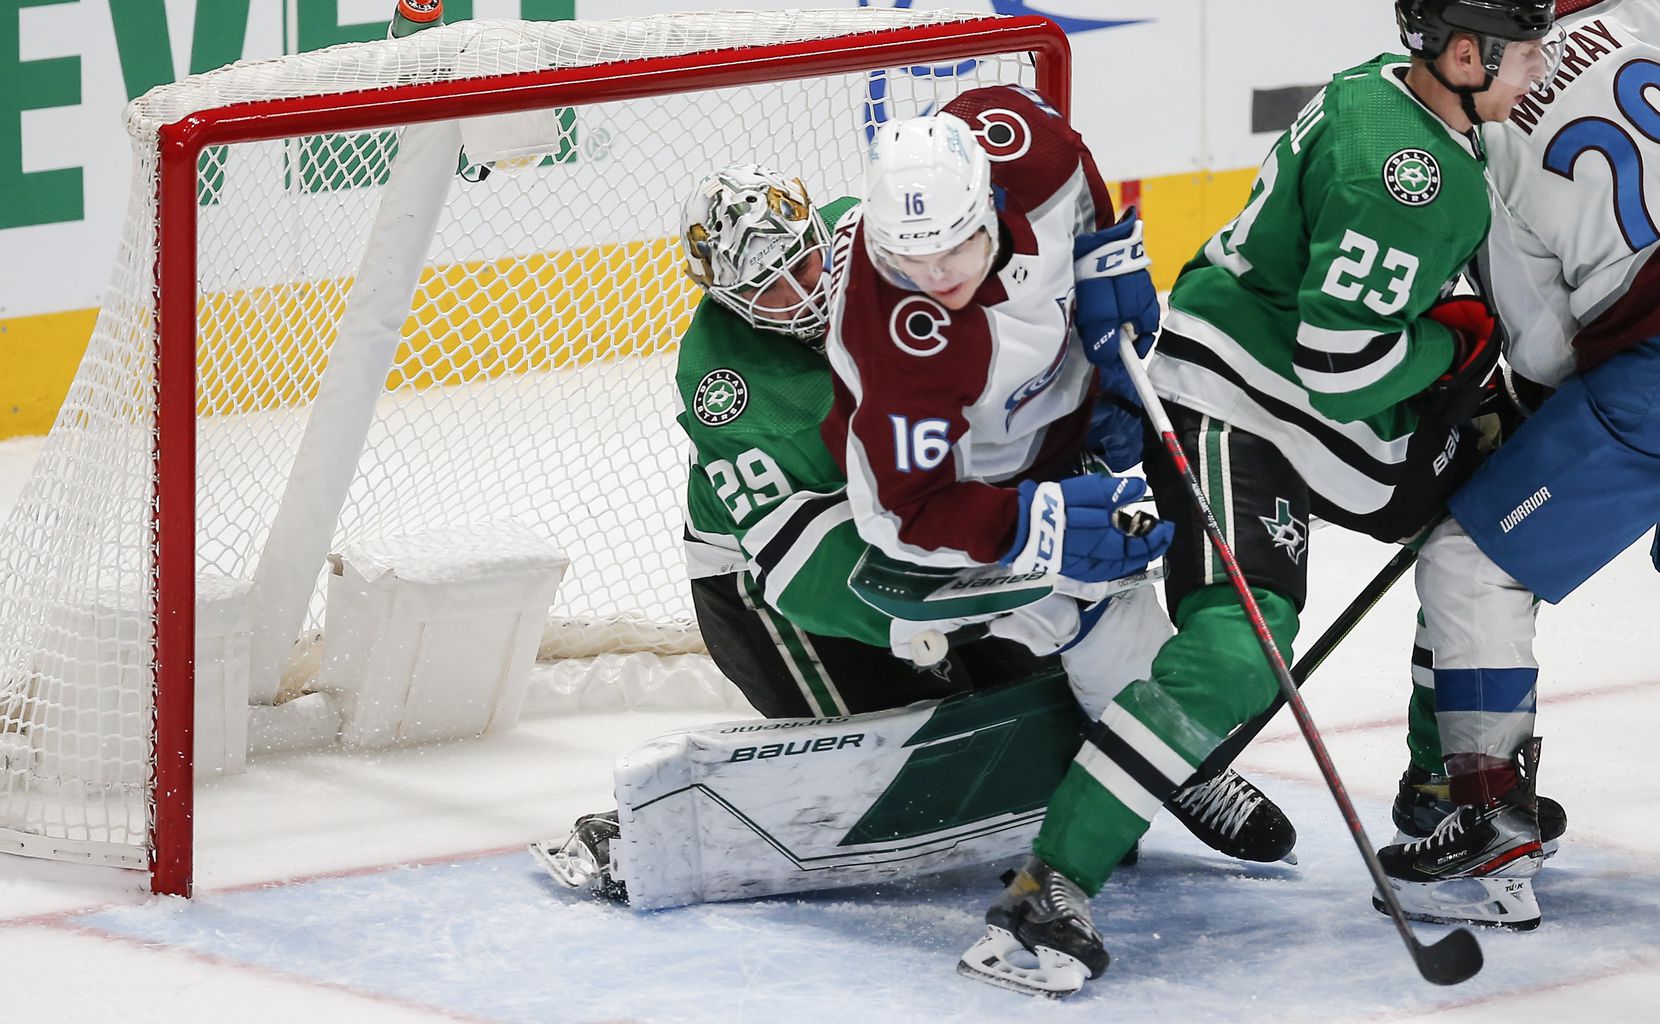 Colorado Avalanche forward Nicolas Aube-Kubel (16) collides into Dallas Stars goaltender Jake Oettinger (29) during the second period of an NHL hockey game in Dallas, Friday, November 26, 2021. Aube-Kubel was charged with a goaltender interference penalty on the play and Oettinger would leave the game. (Brandon Wade/Special Contributor)